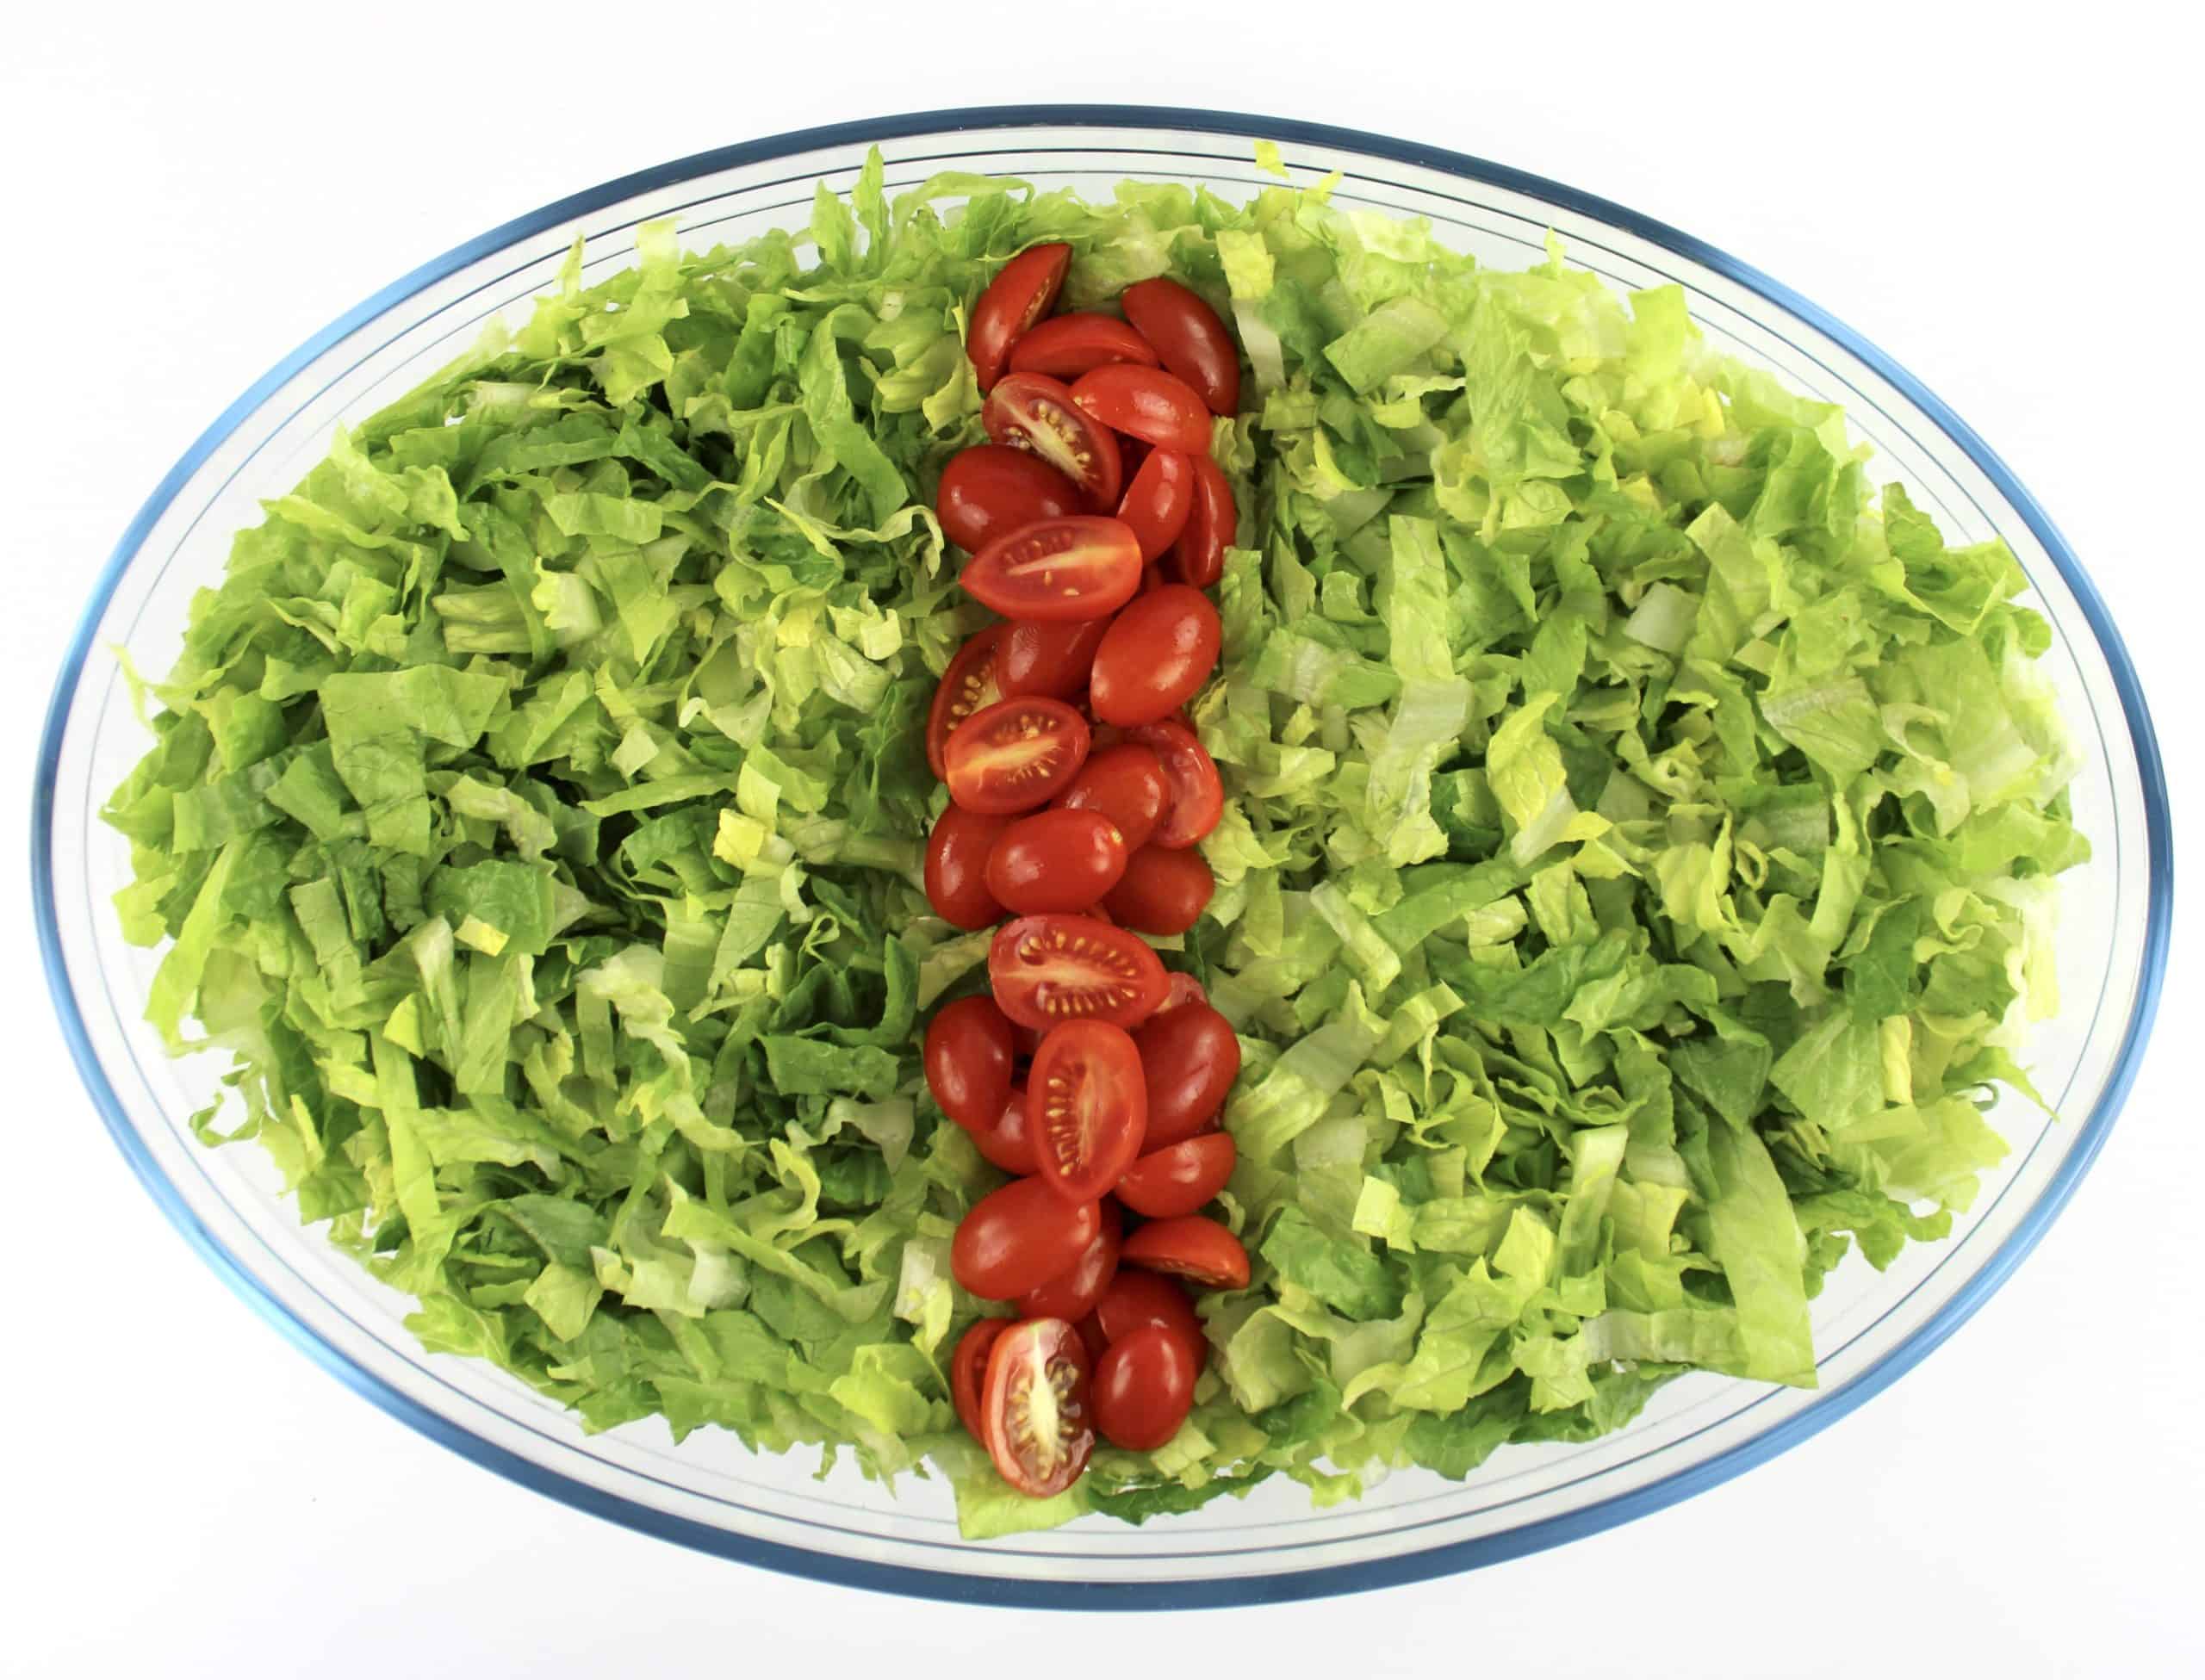 shredded romaine lettuce in oval glass bowl with row of halved tomatoes down the middle